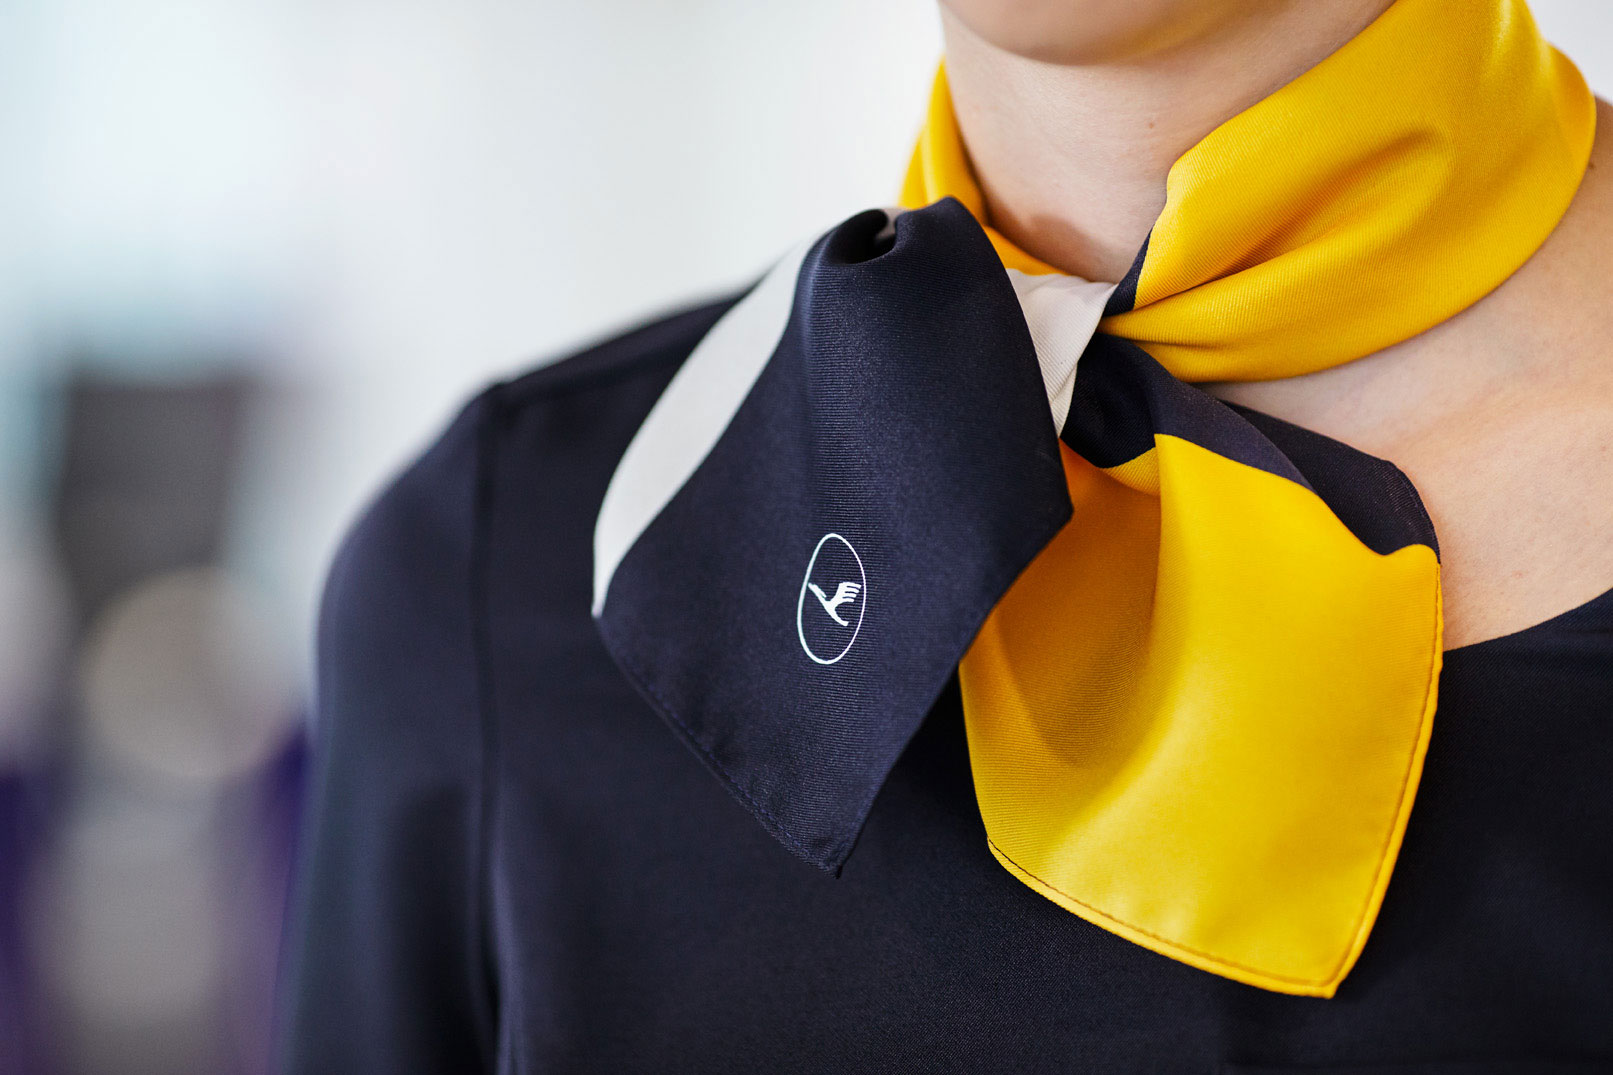 Aicher's yellow will be retained in some instances, such as in the staff uniforms. Image courtesy of Lufthansa